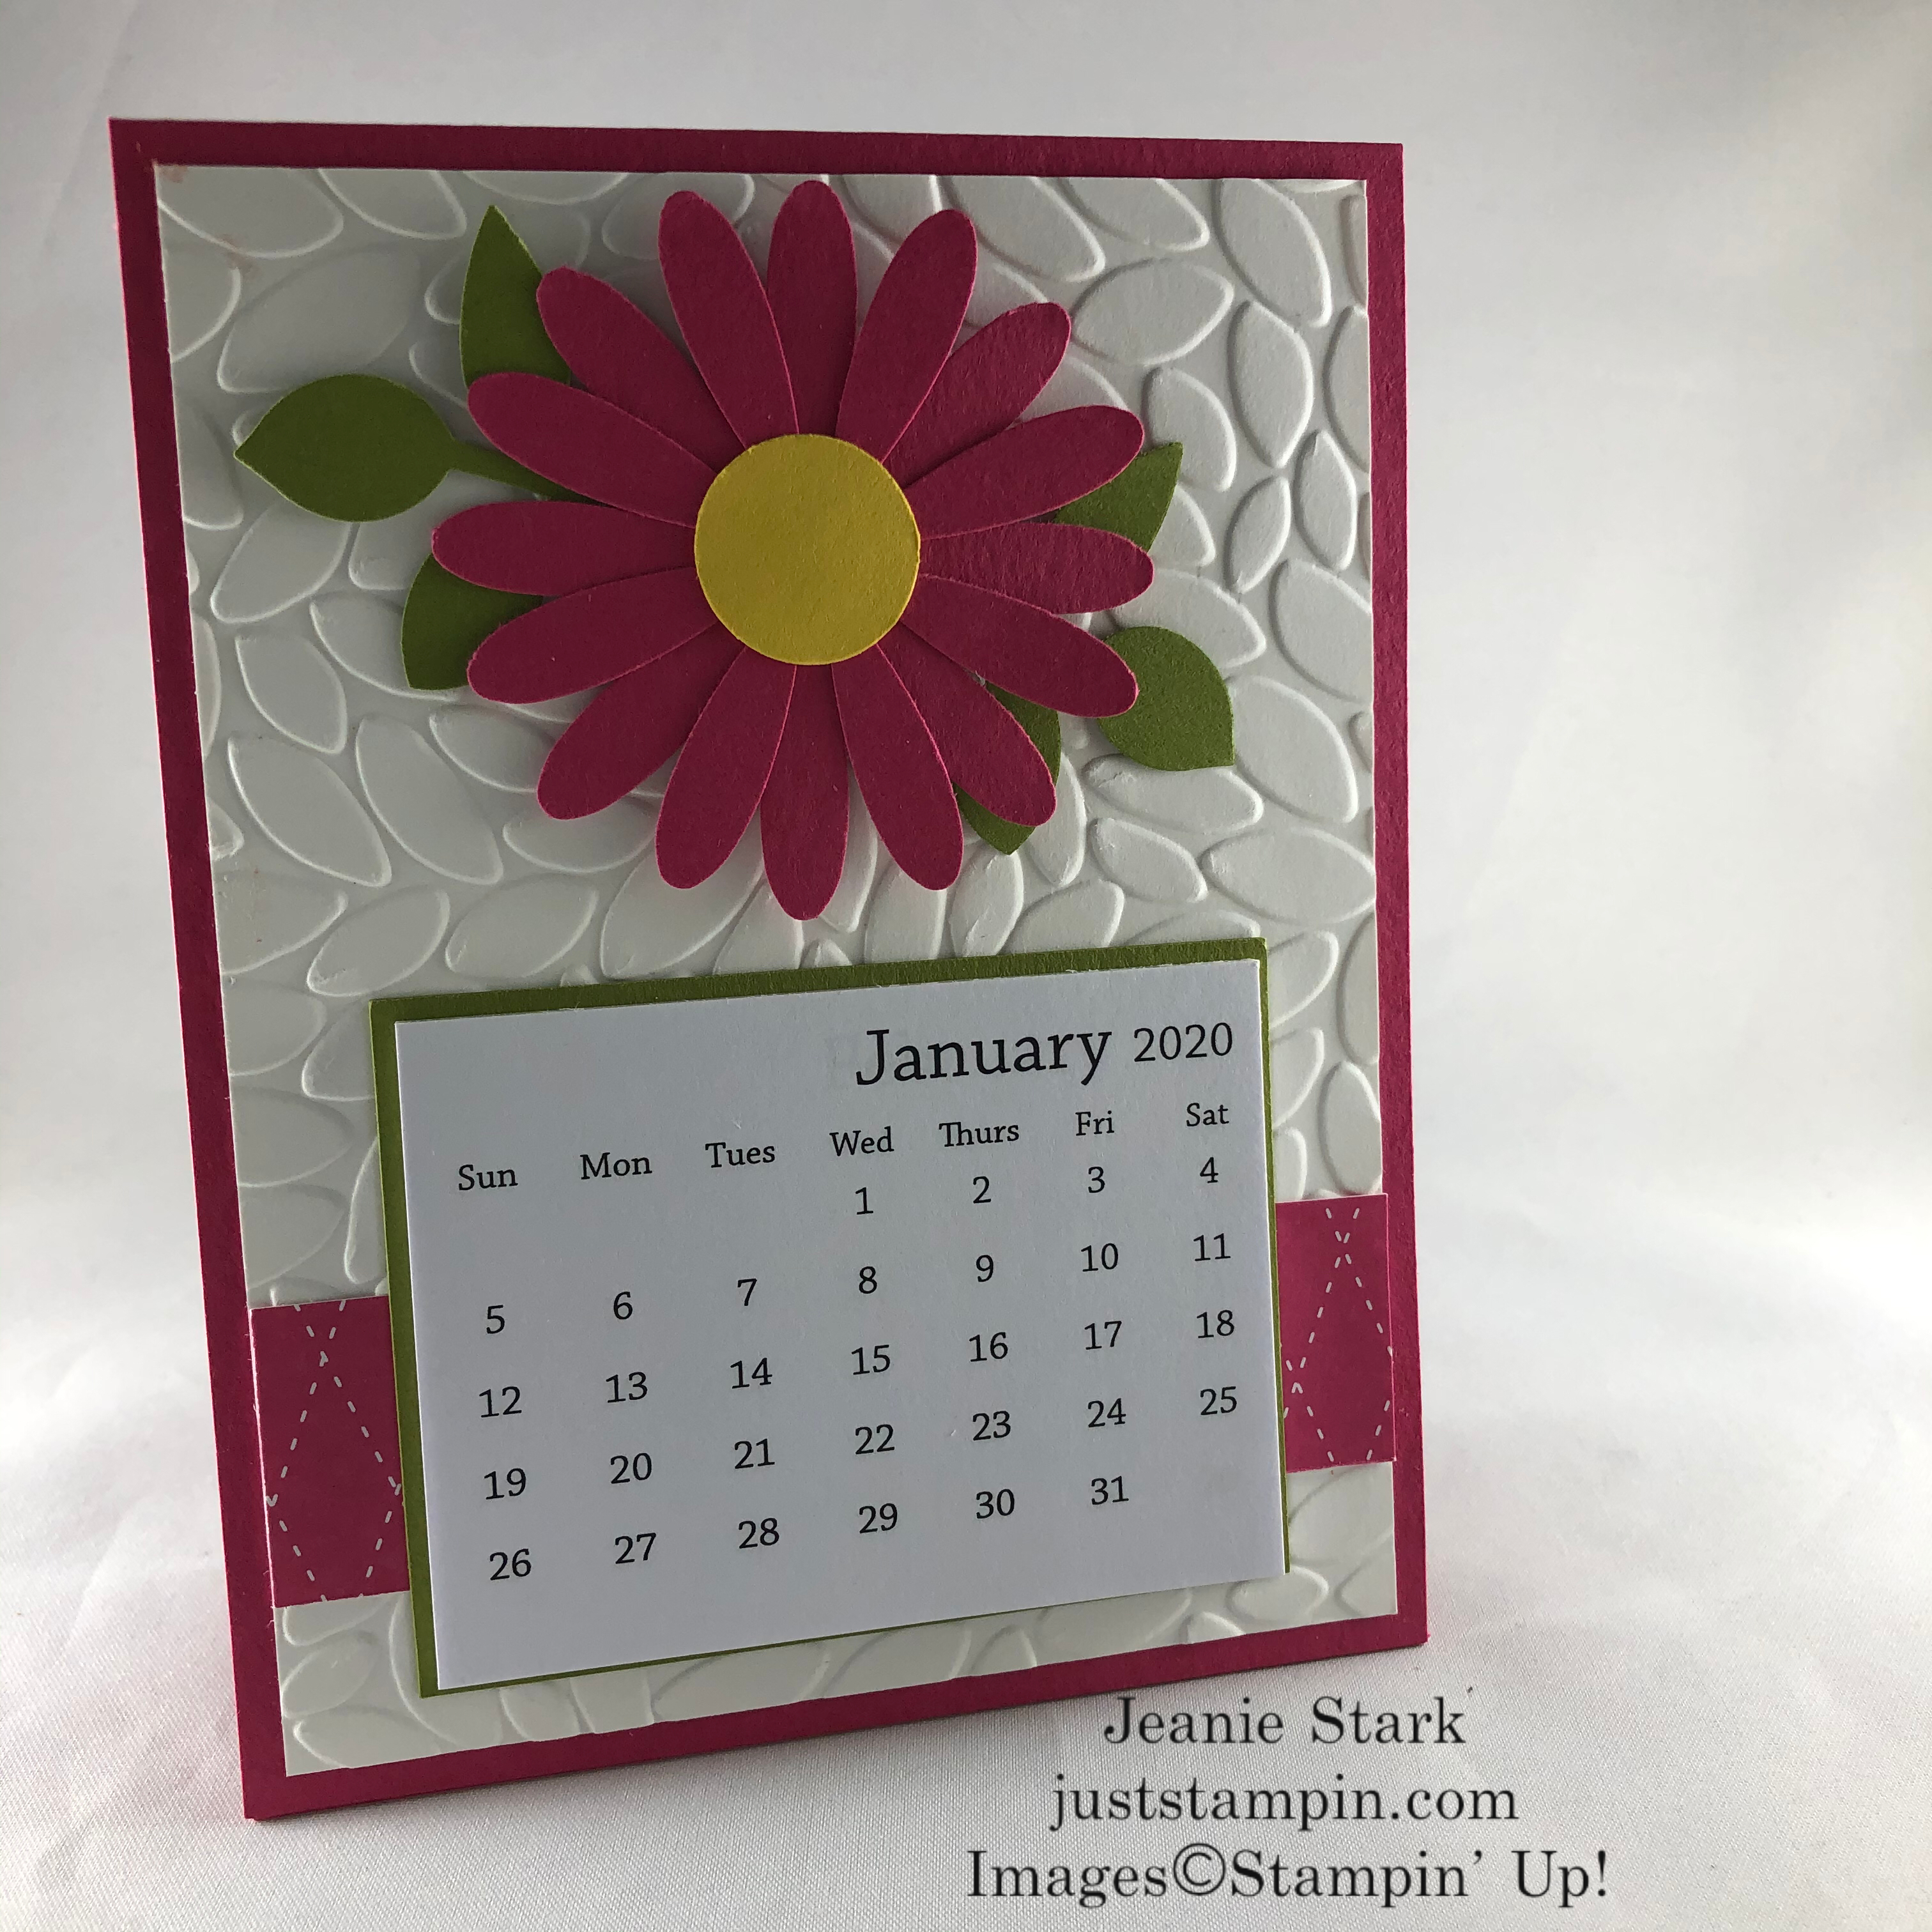 Stampin' Up! Calendar Card idea made with Daisy Punch and Petal Burst Embossing Folder - Jeanie Stark StampinUp